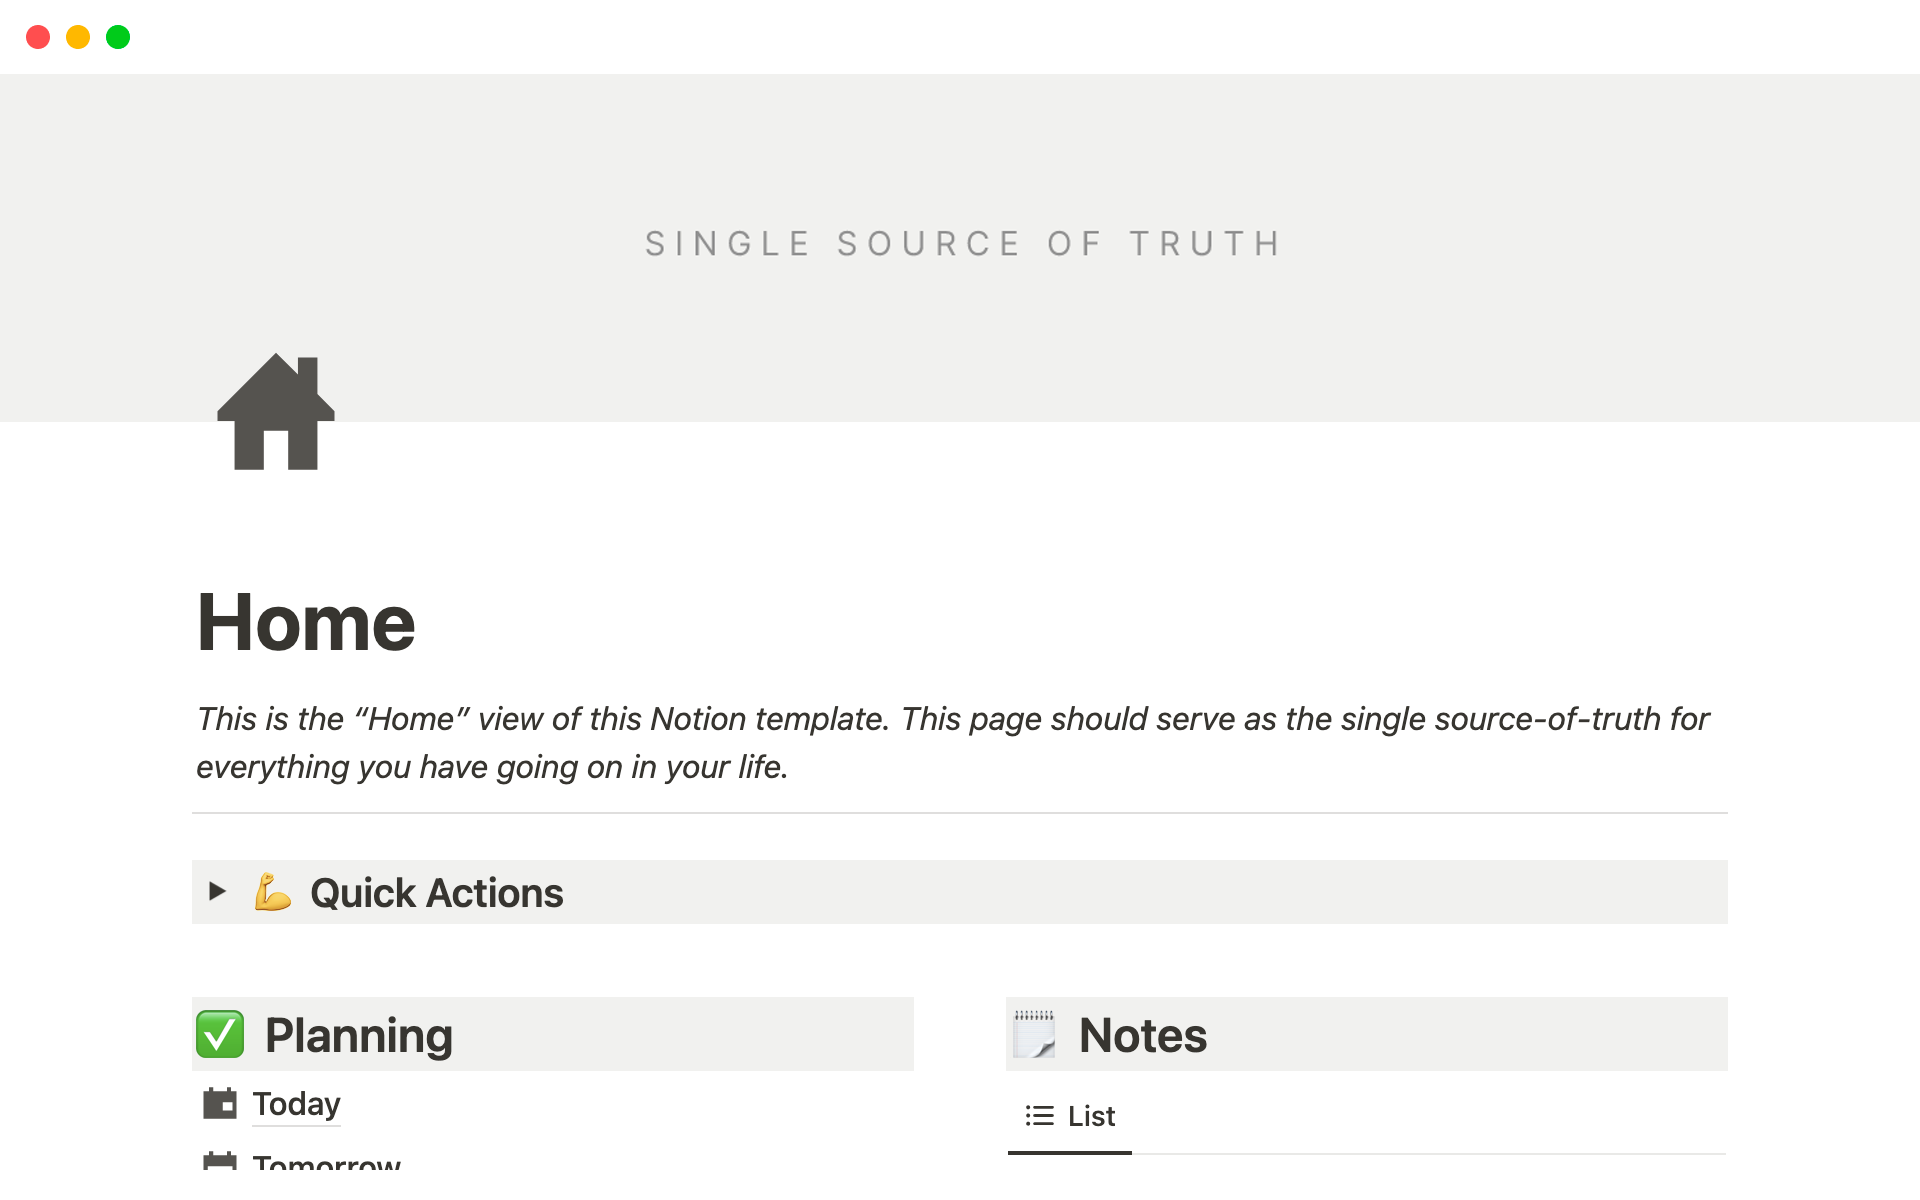 Single Source-of-Truth should be your one-stop to stay organized, integrate plugins, connect Google calendar, and much more. No more scouring different sites for all of the things...